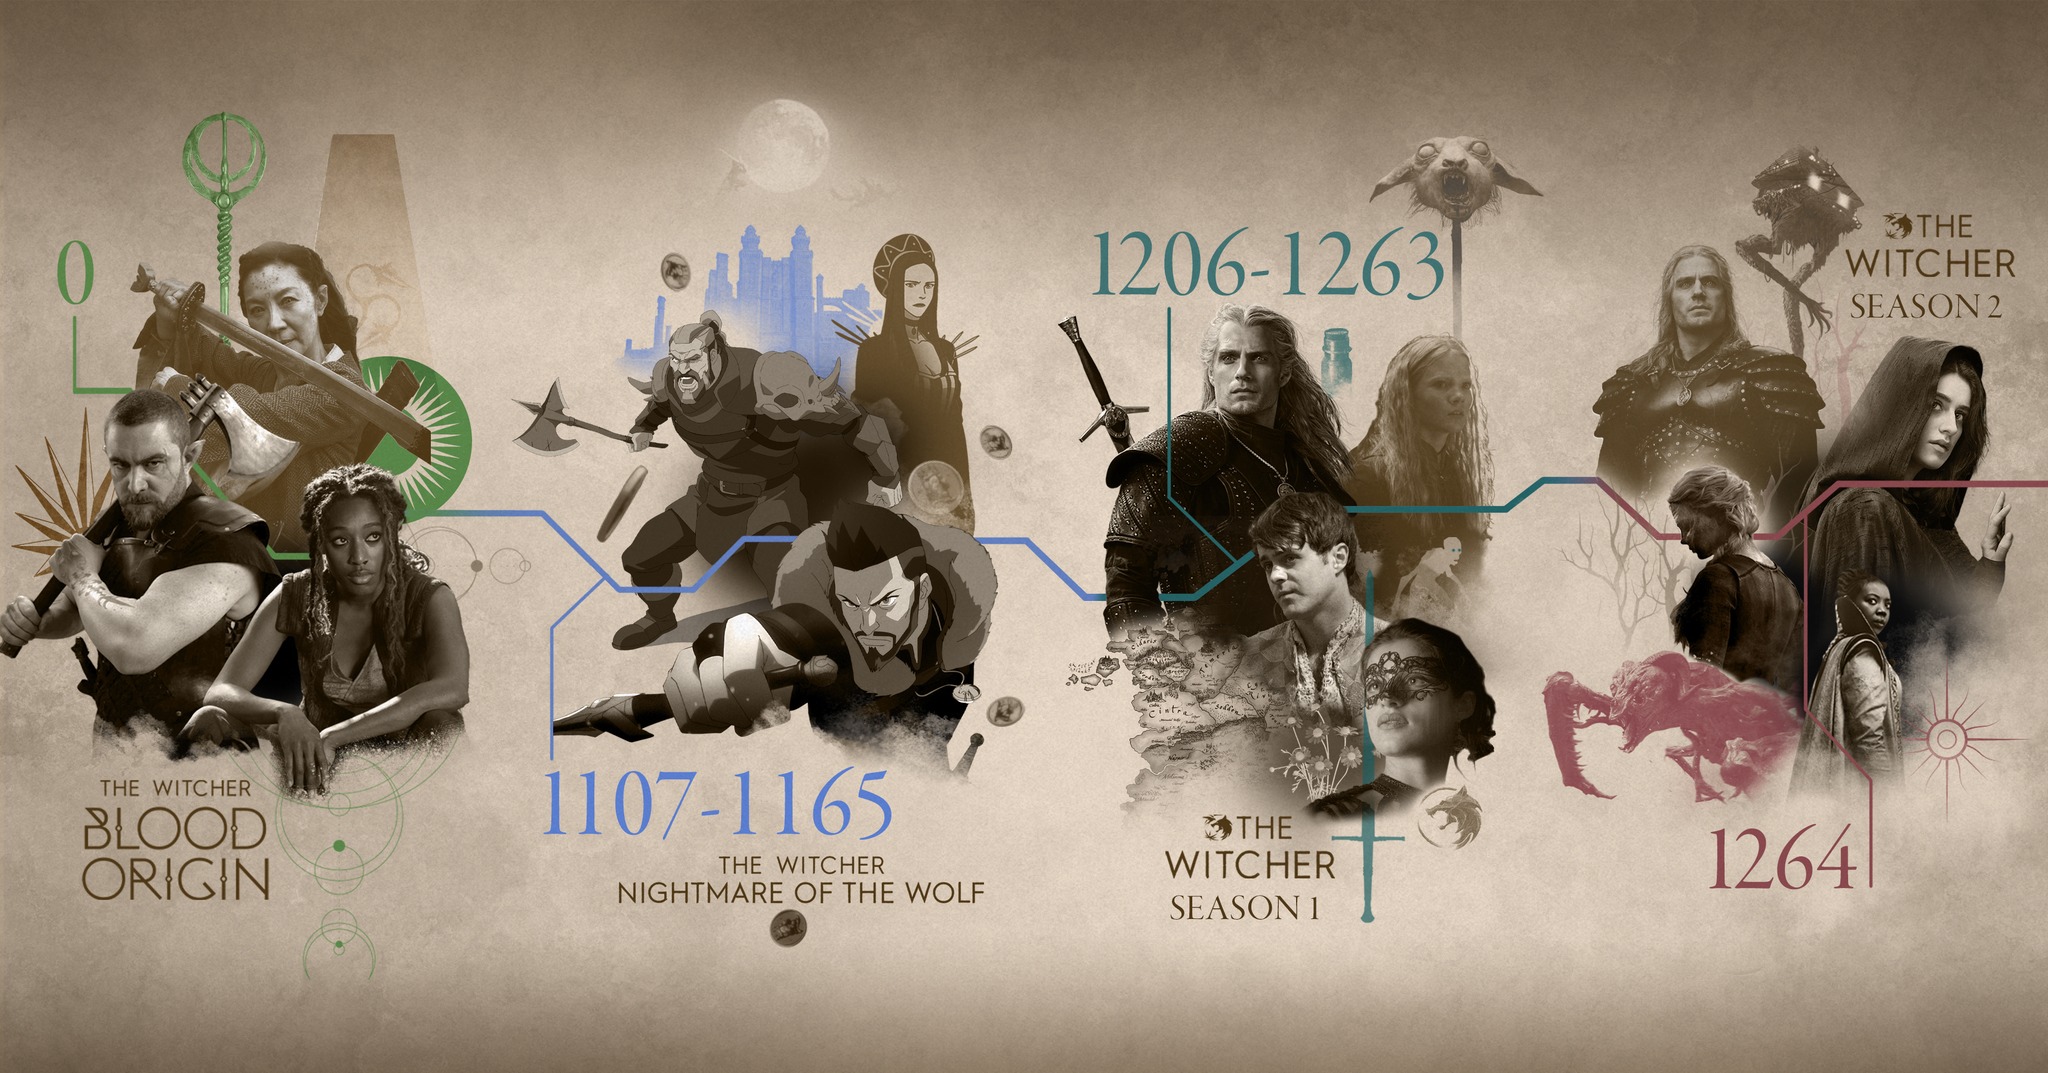 People 2048x1073 The Witcher (TV Series) Netflix TV Series timeline simple background The Witcher: Blood Origin The Witcher: Nightmare of the Wolf Geralt of Rivia group of people infographics